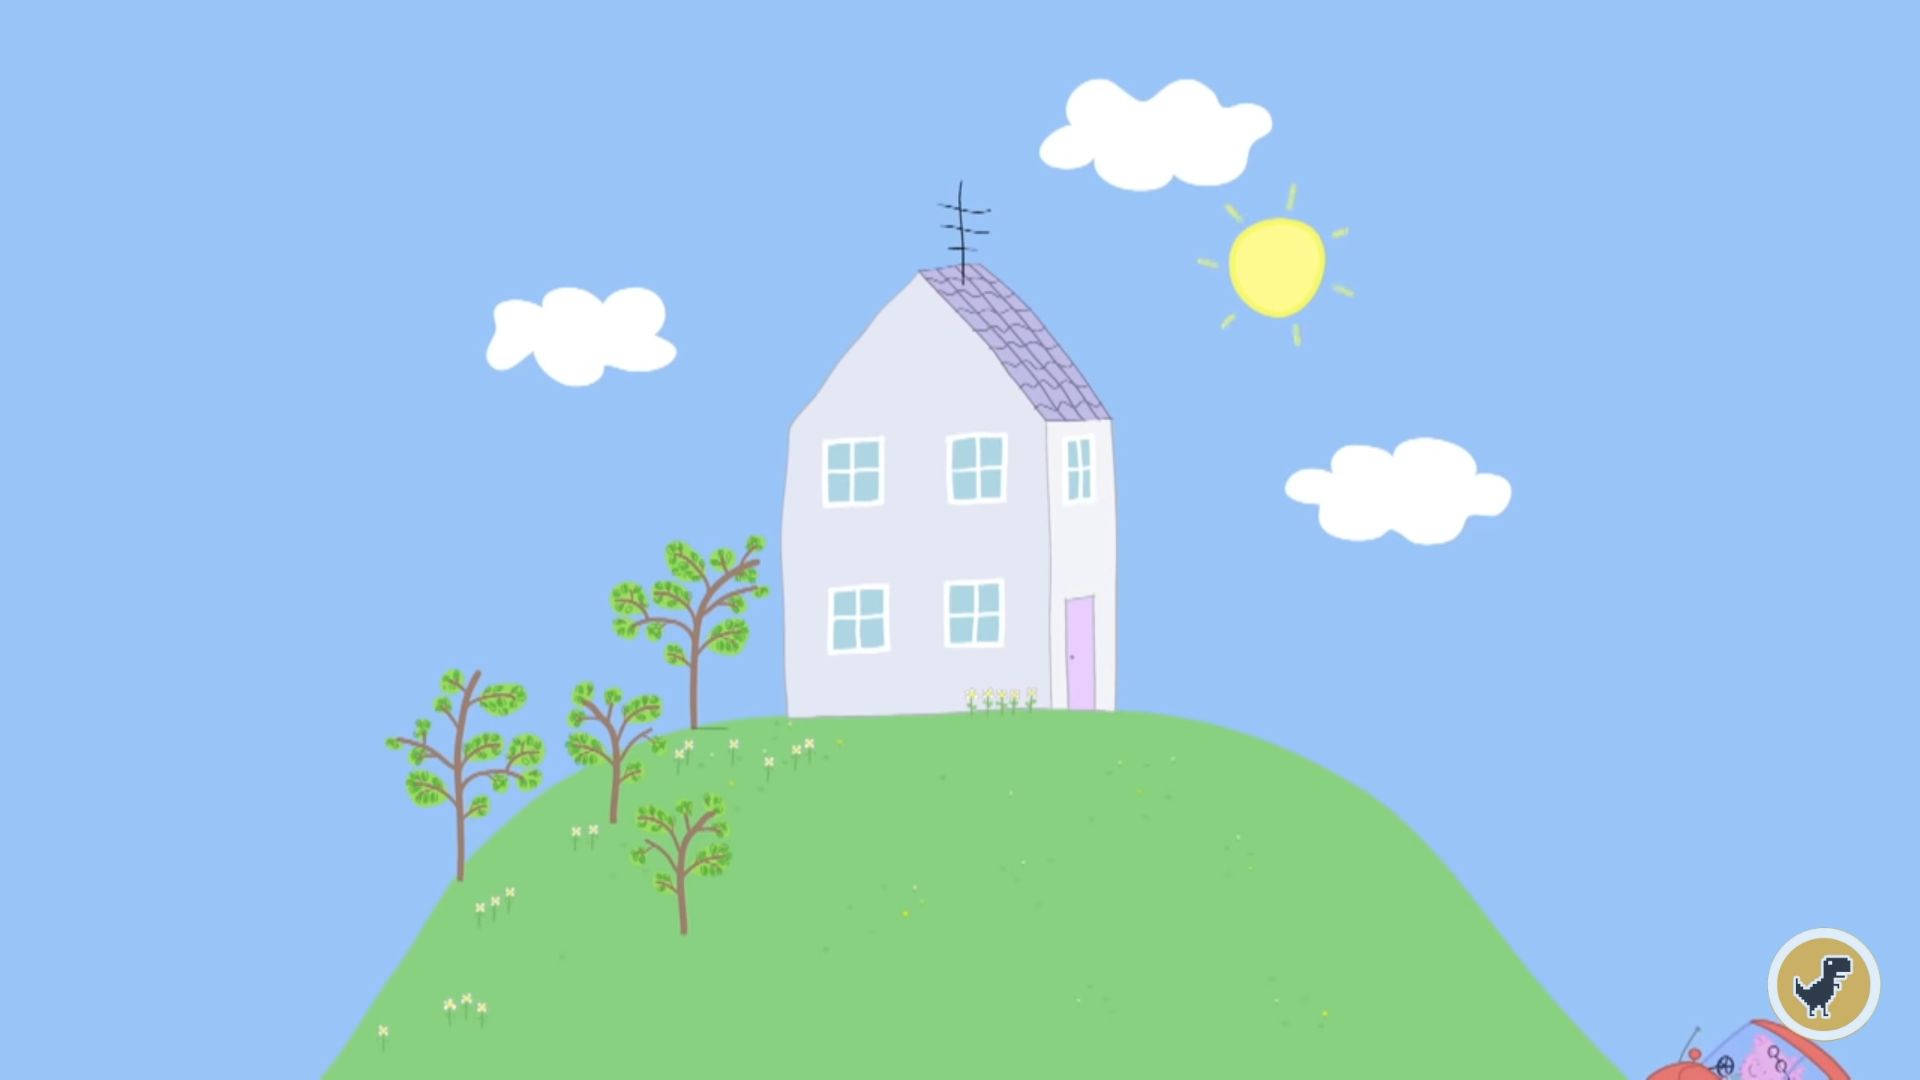 Peppa Pig House scary Wallpaper  NawPic